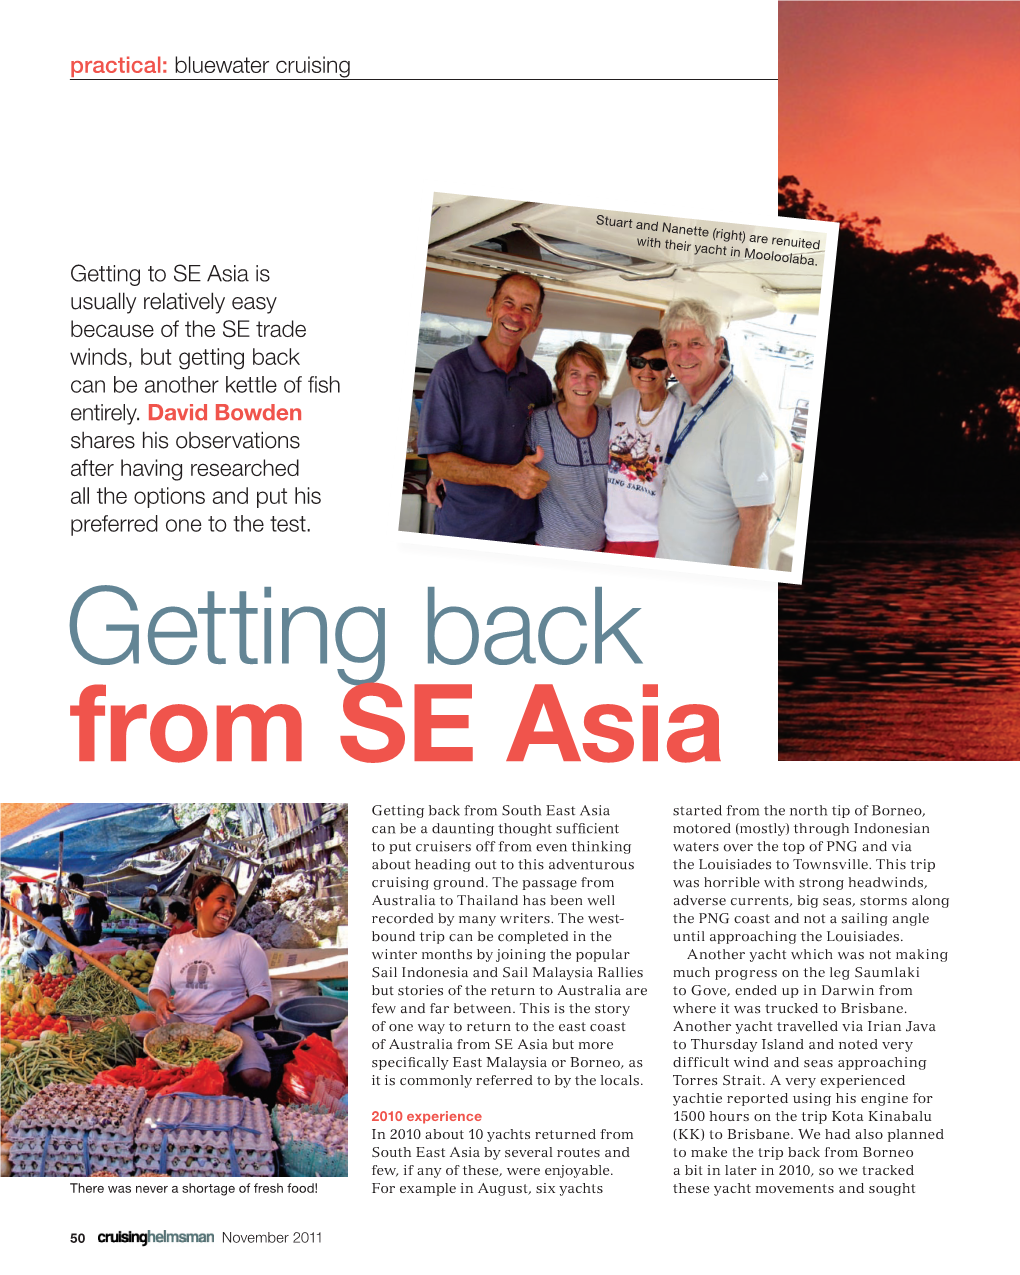 Getting Back from SE Asia